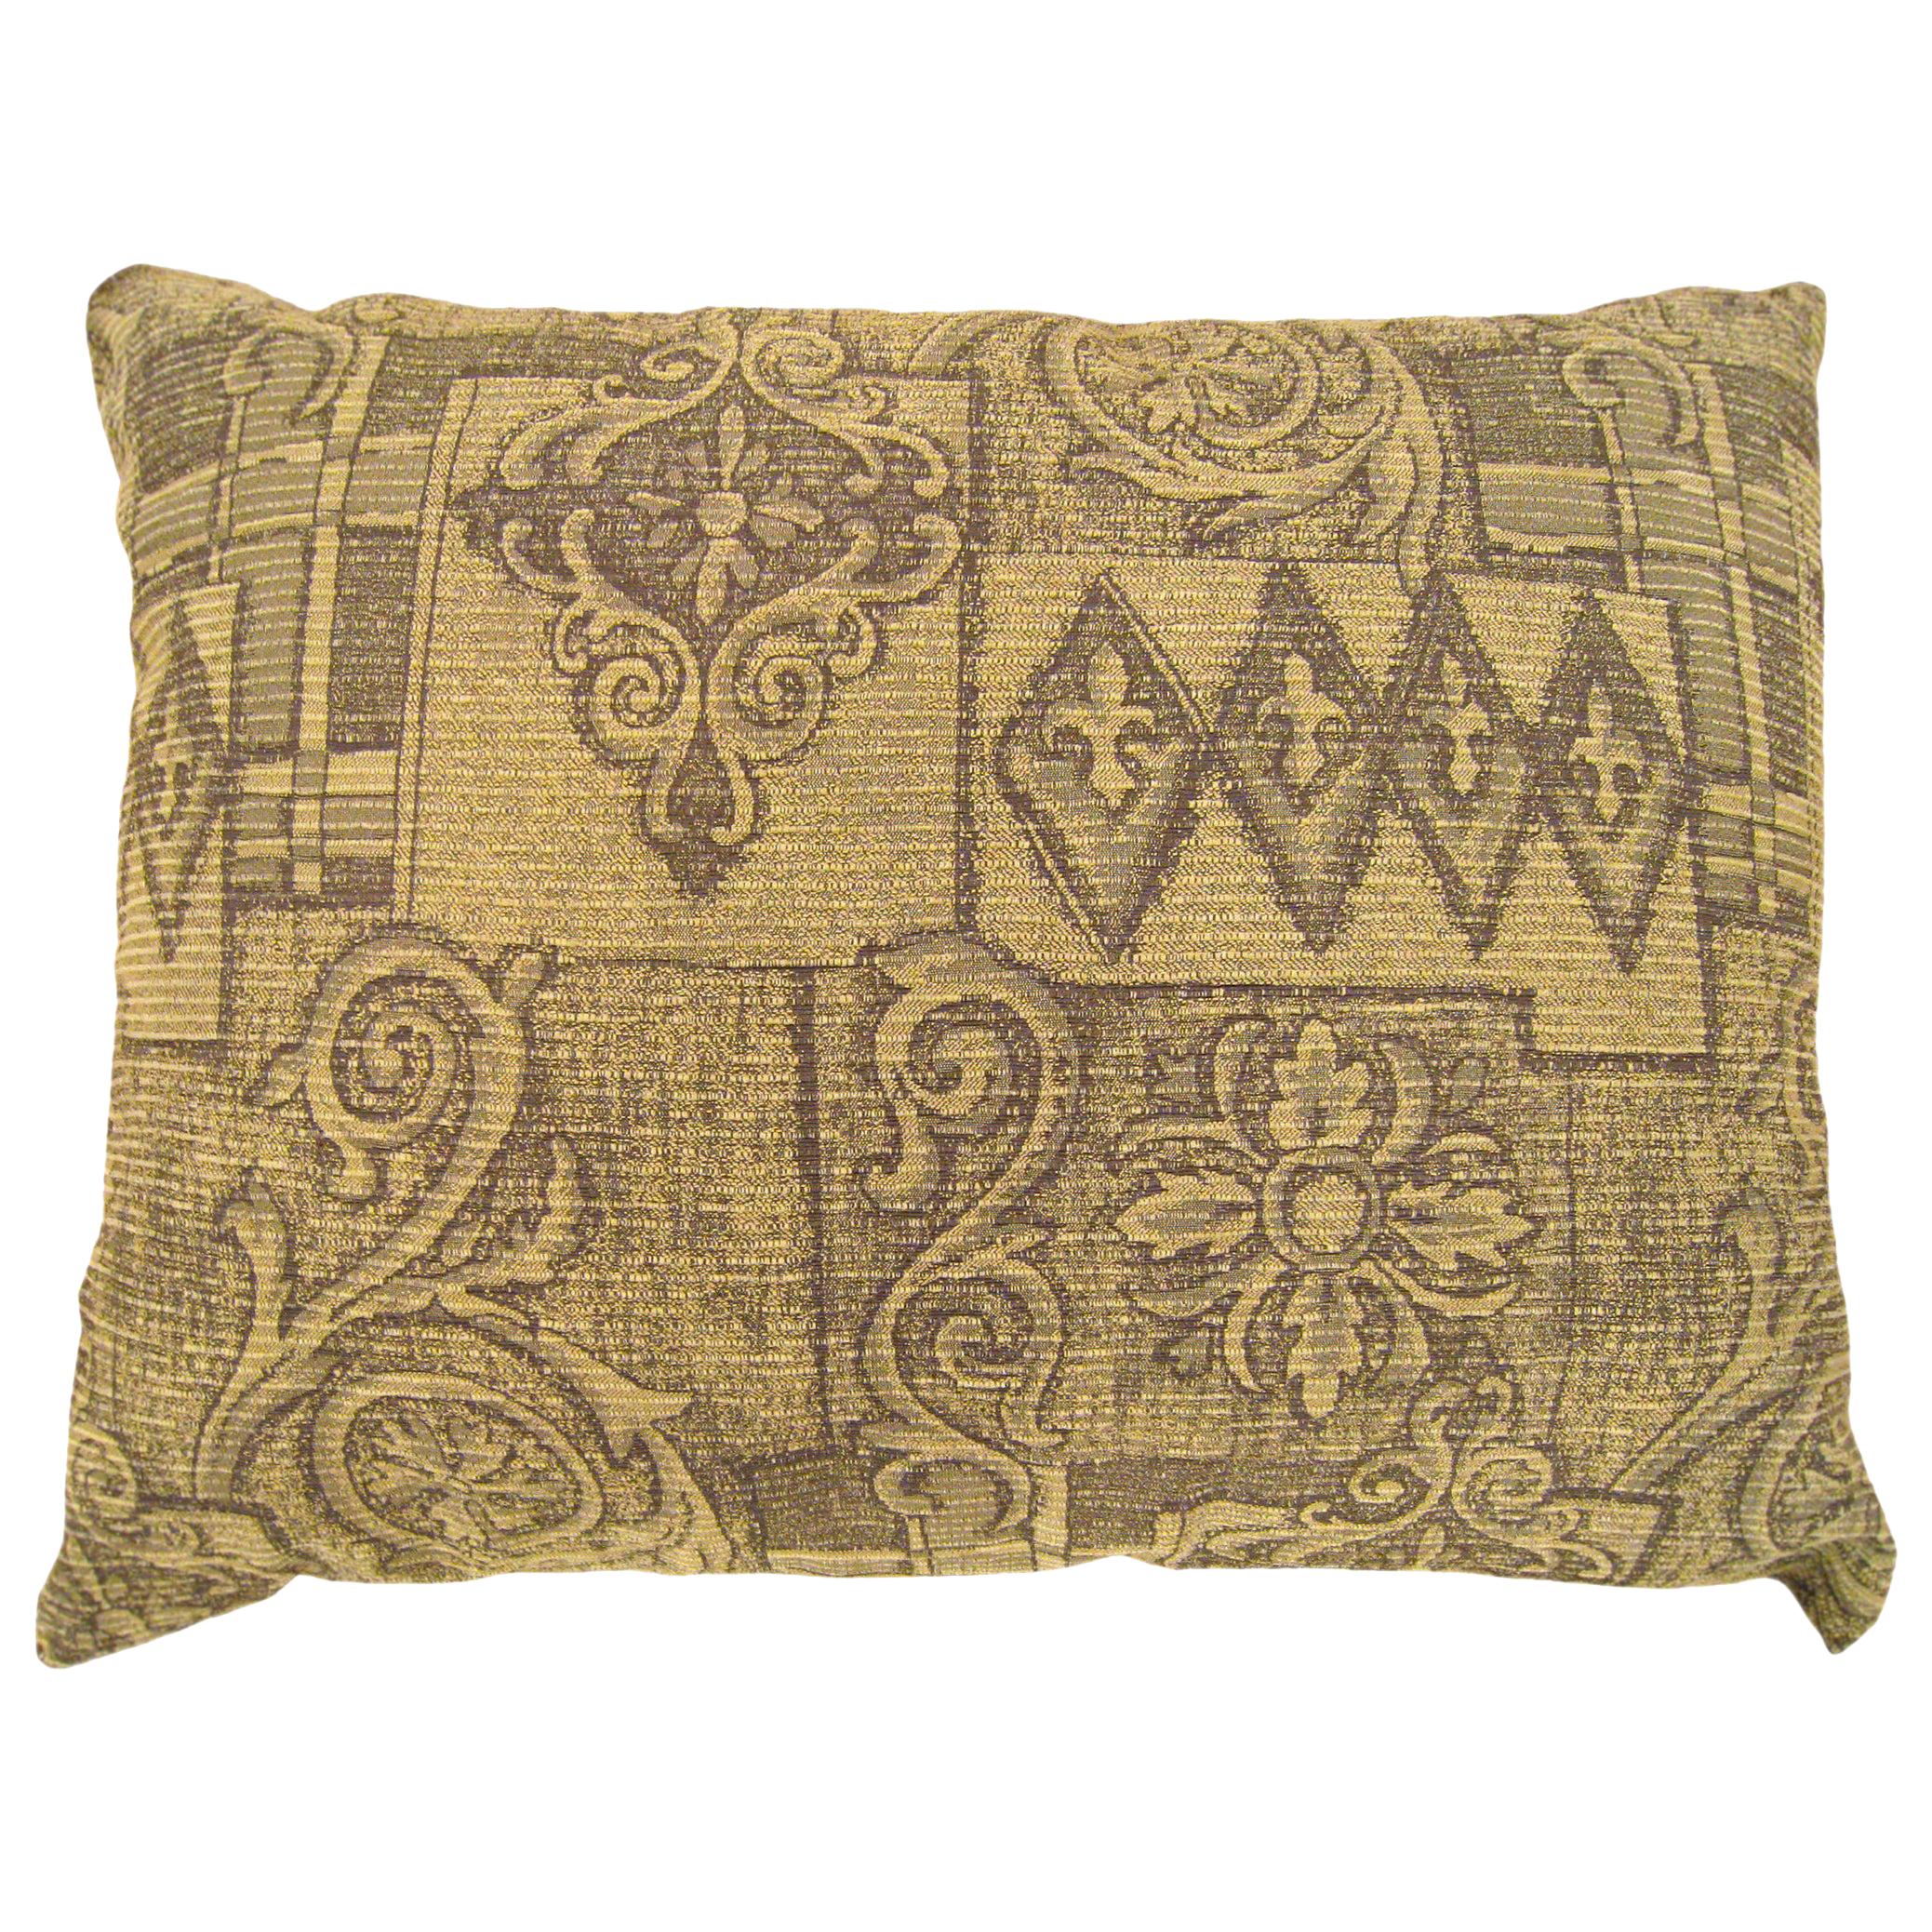 Vintage Decorative Pillow with Floro-Geometric Design on Both Sides